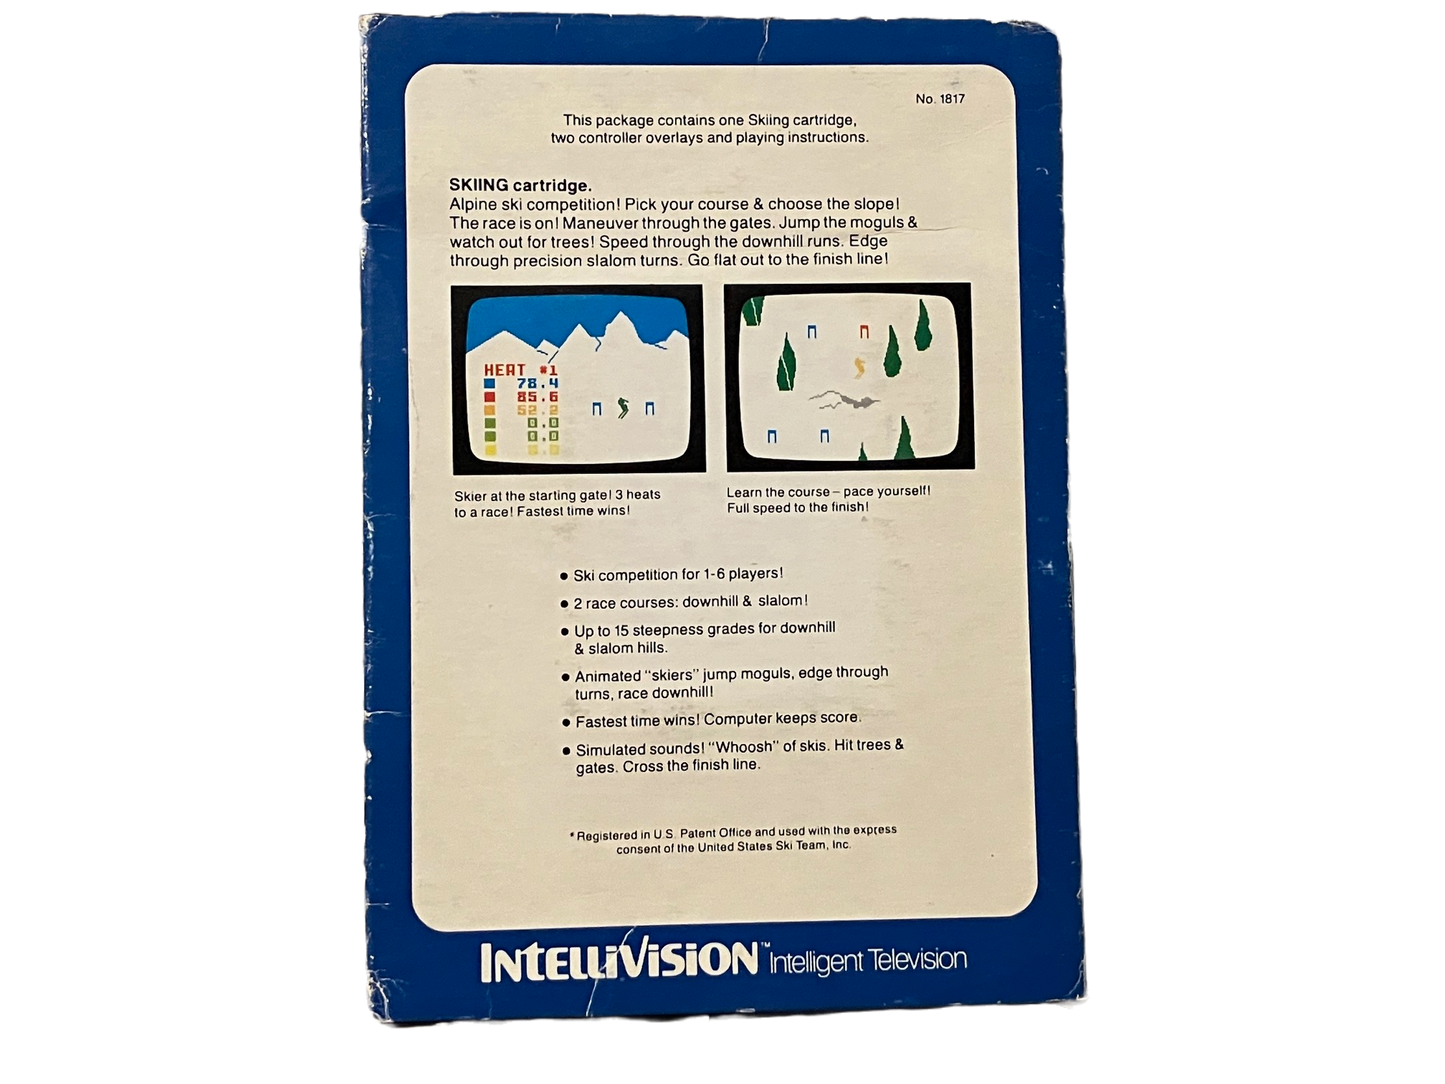 Skiing Intellivision Video Game